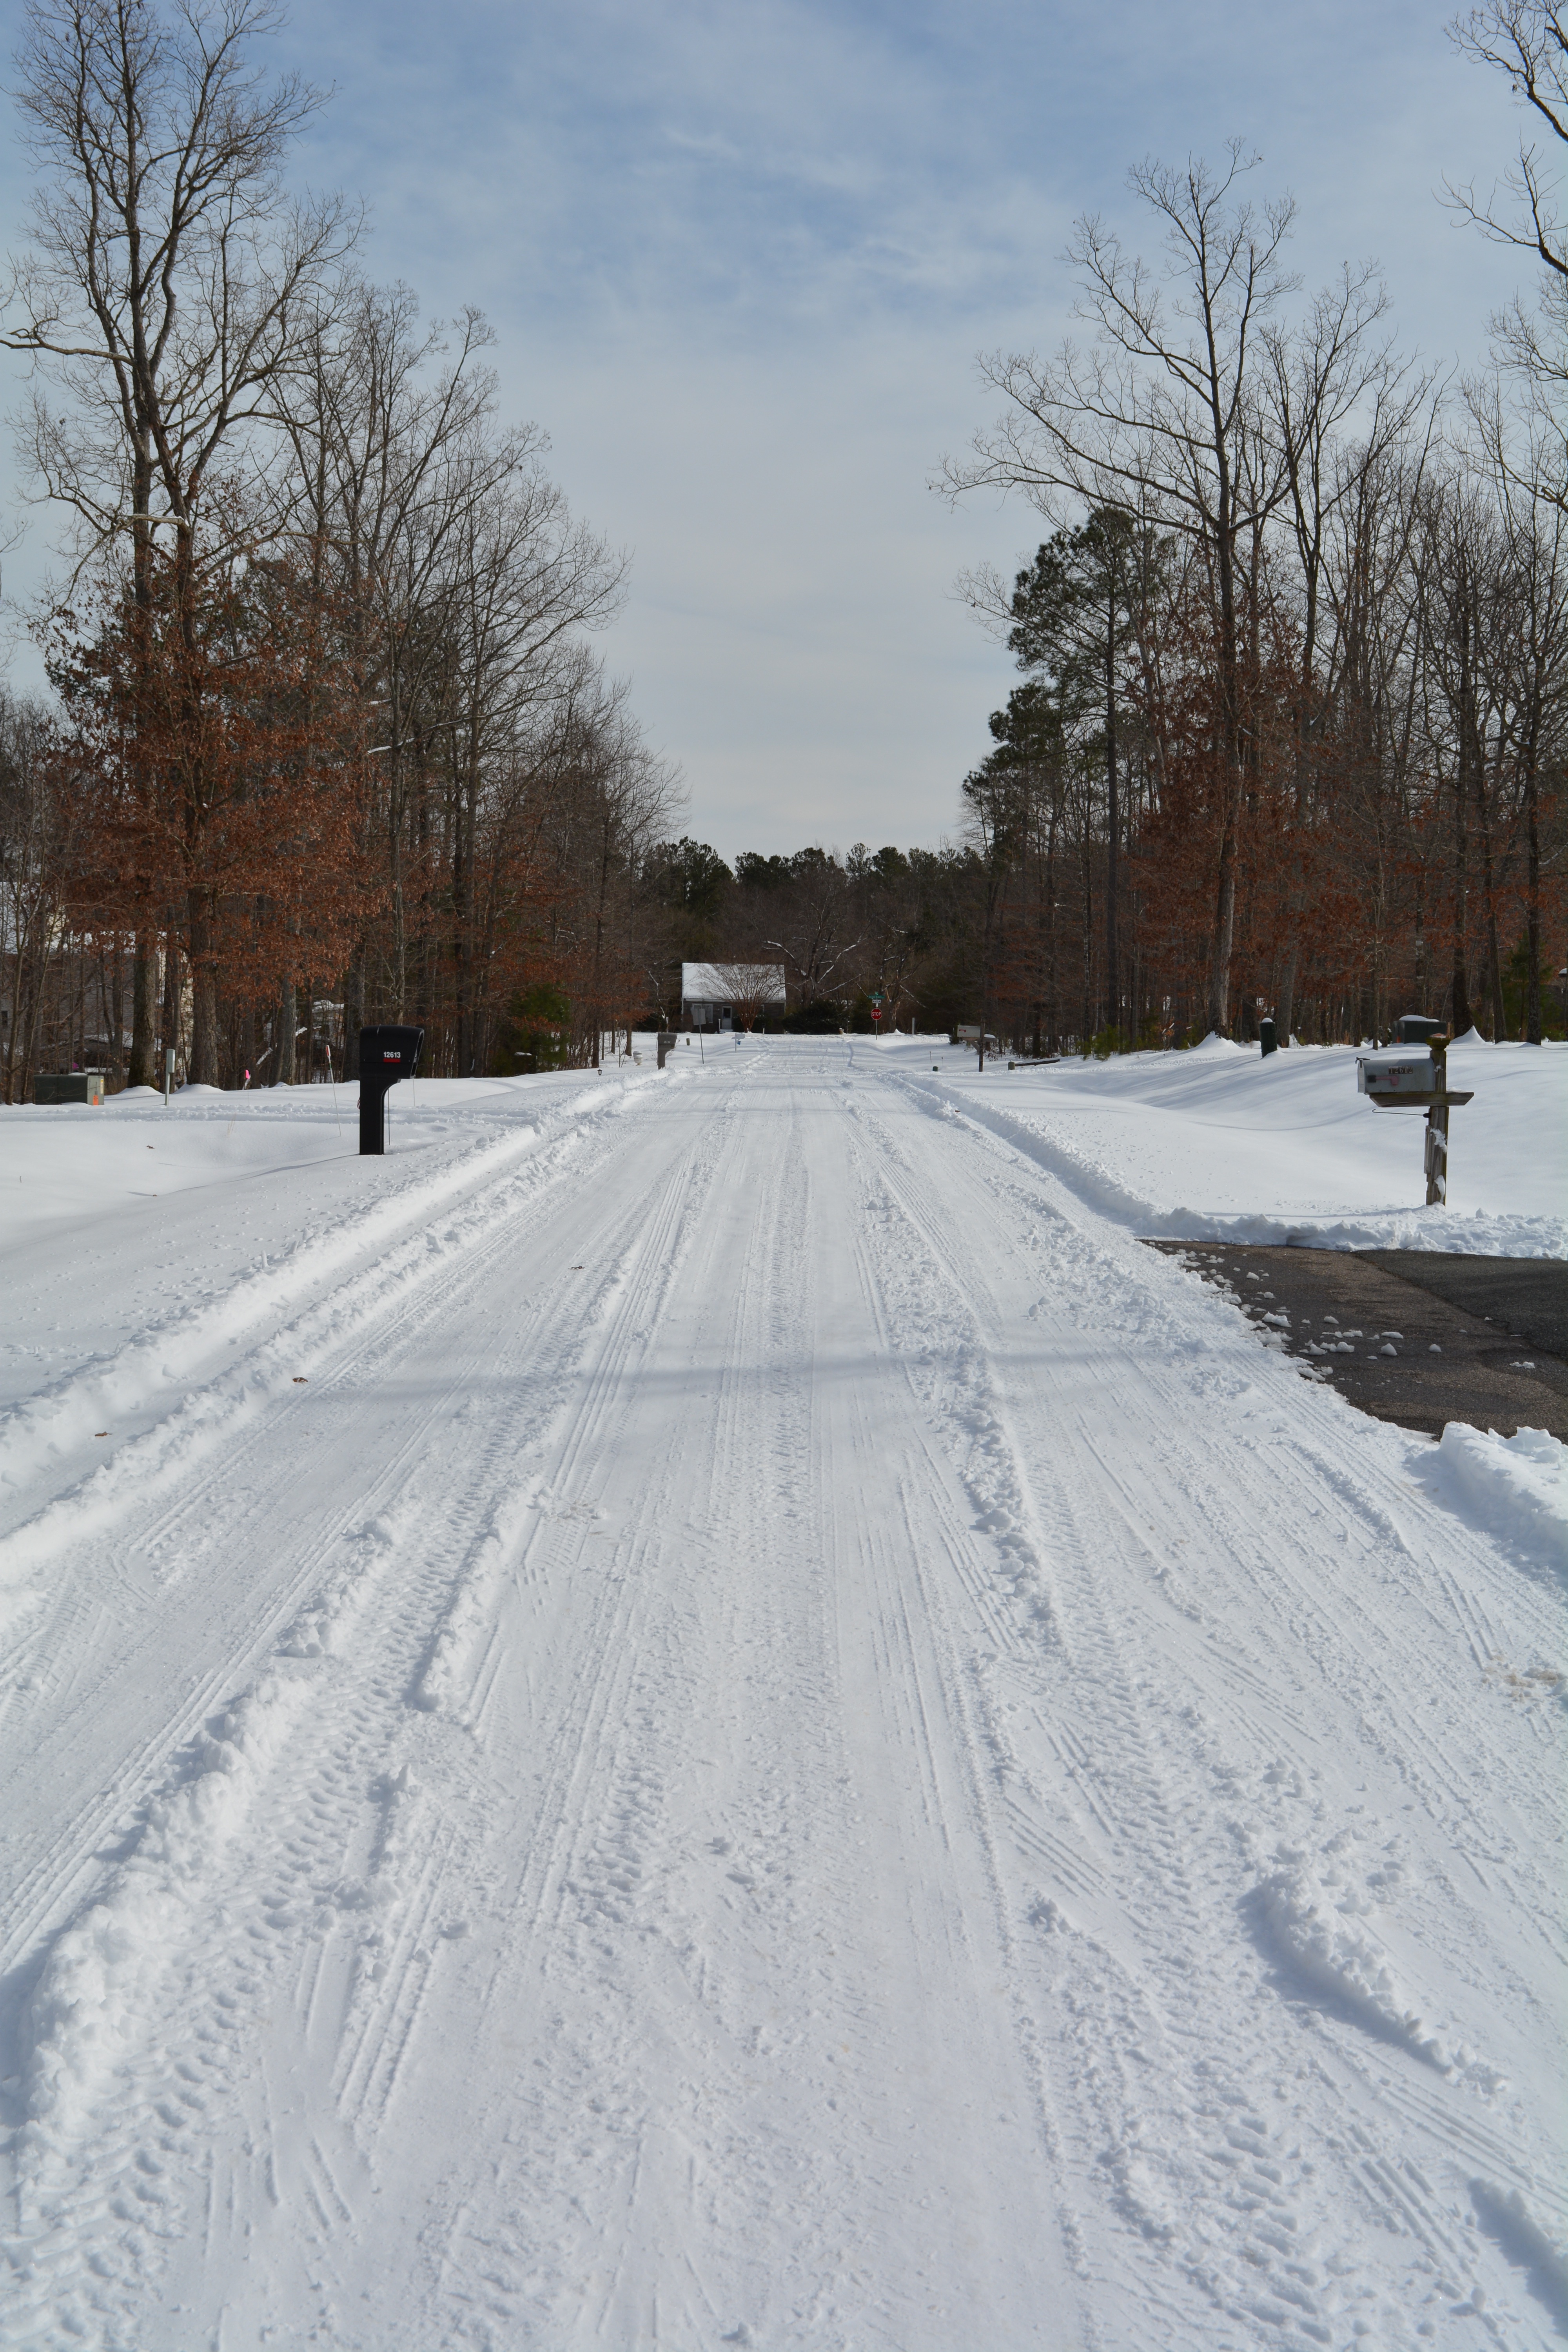 A small straight section of road in a snow covered subdivision.